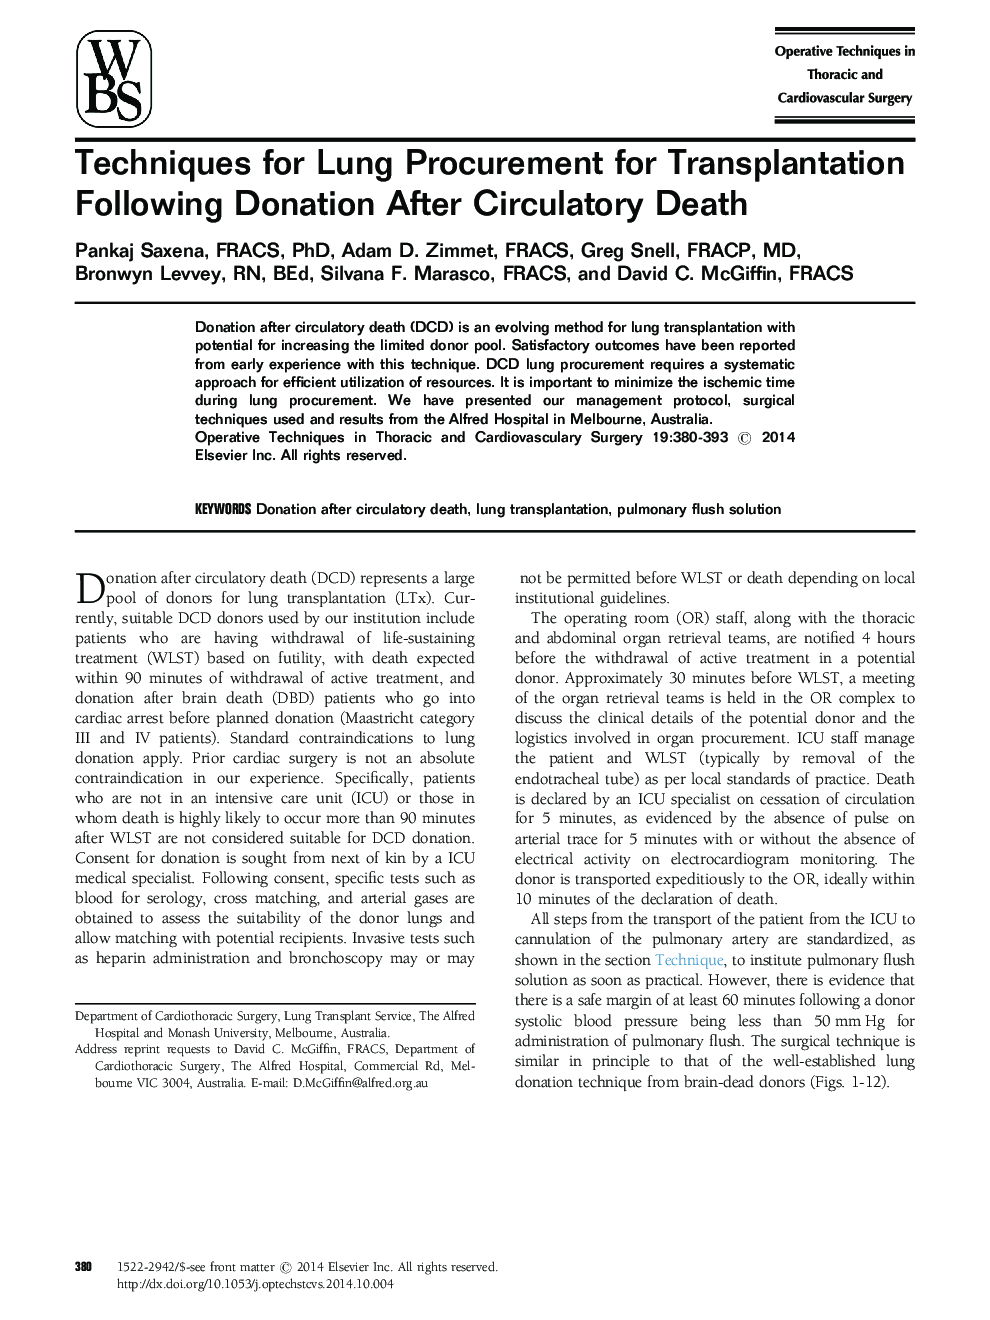 Techniques for Lung Procurement for Transplantation Following Donation After Circulatory Death